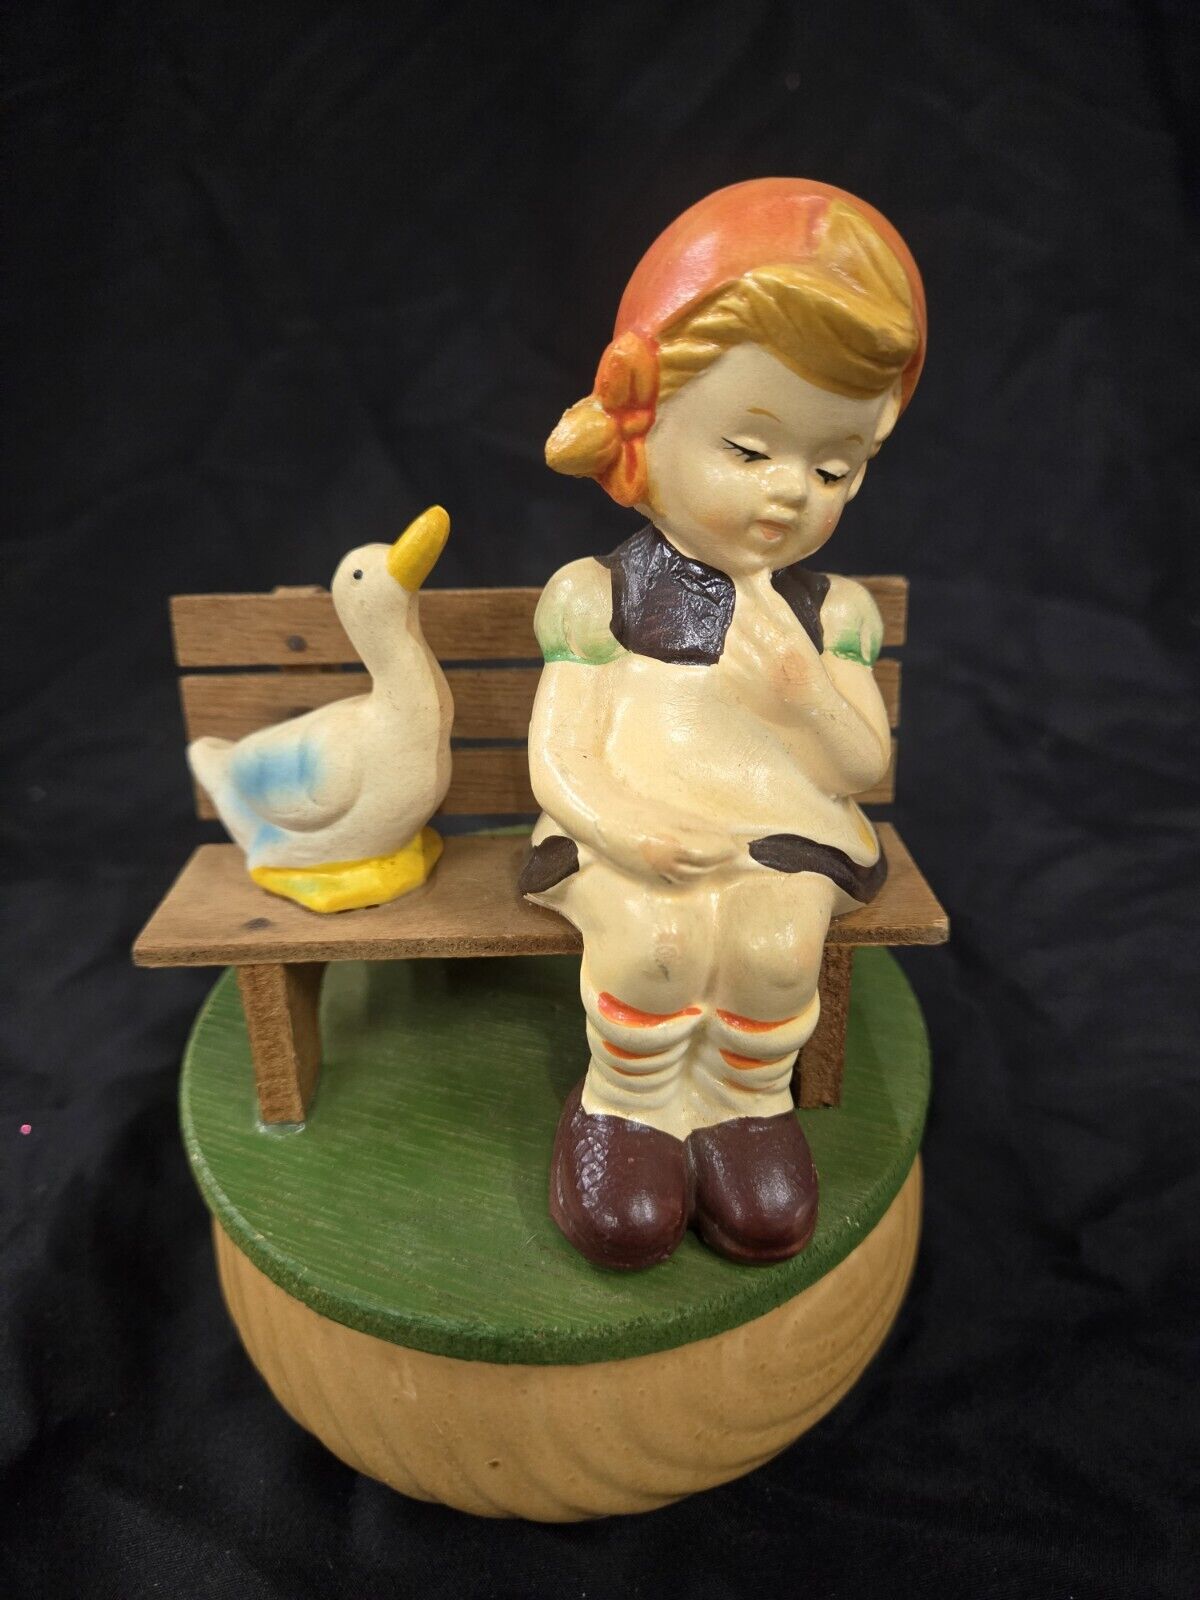 VINTAGE Tilso Figural Young Girl & Duck Sitting on Wood Bench Ceramic Music Box